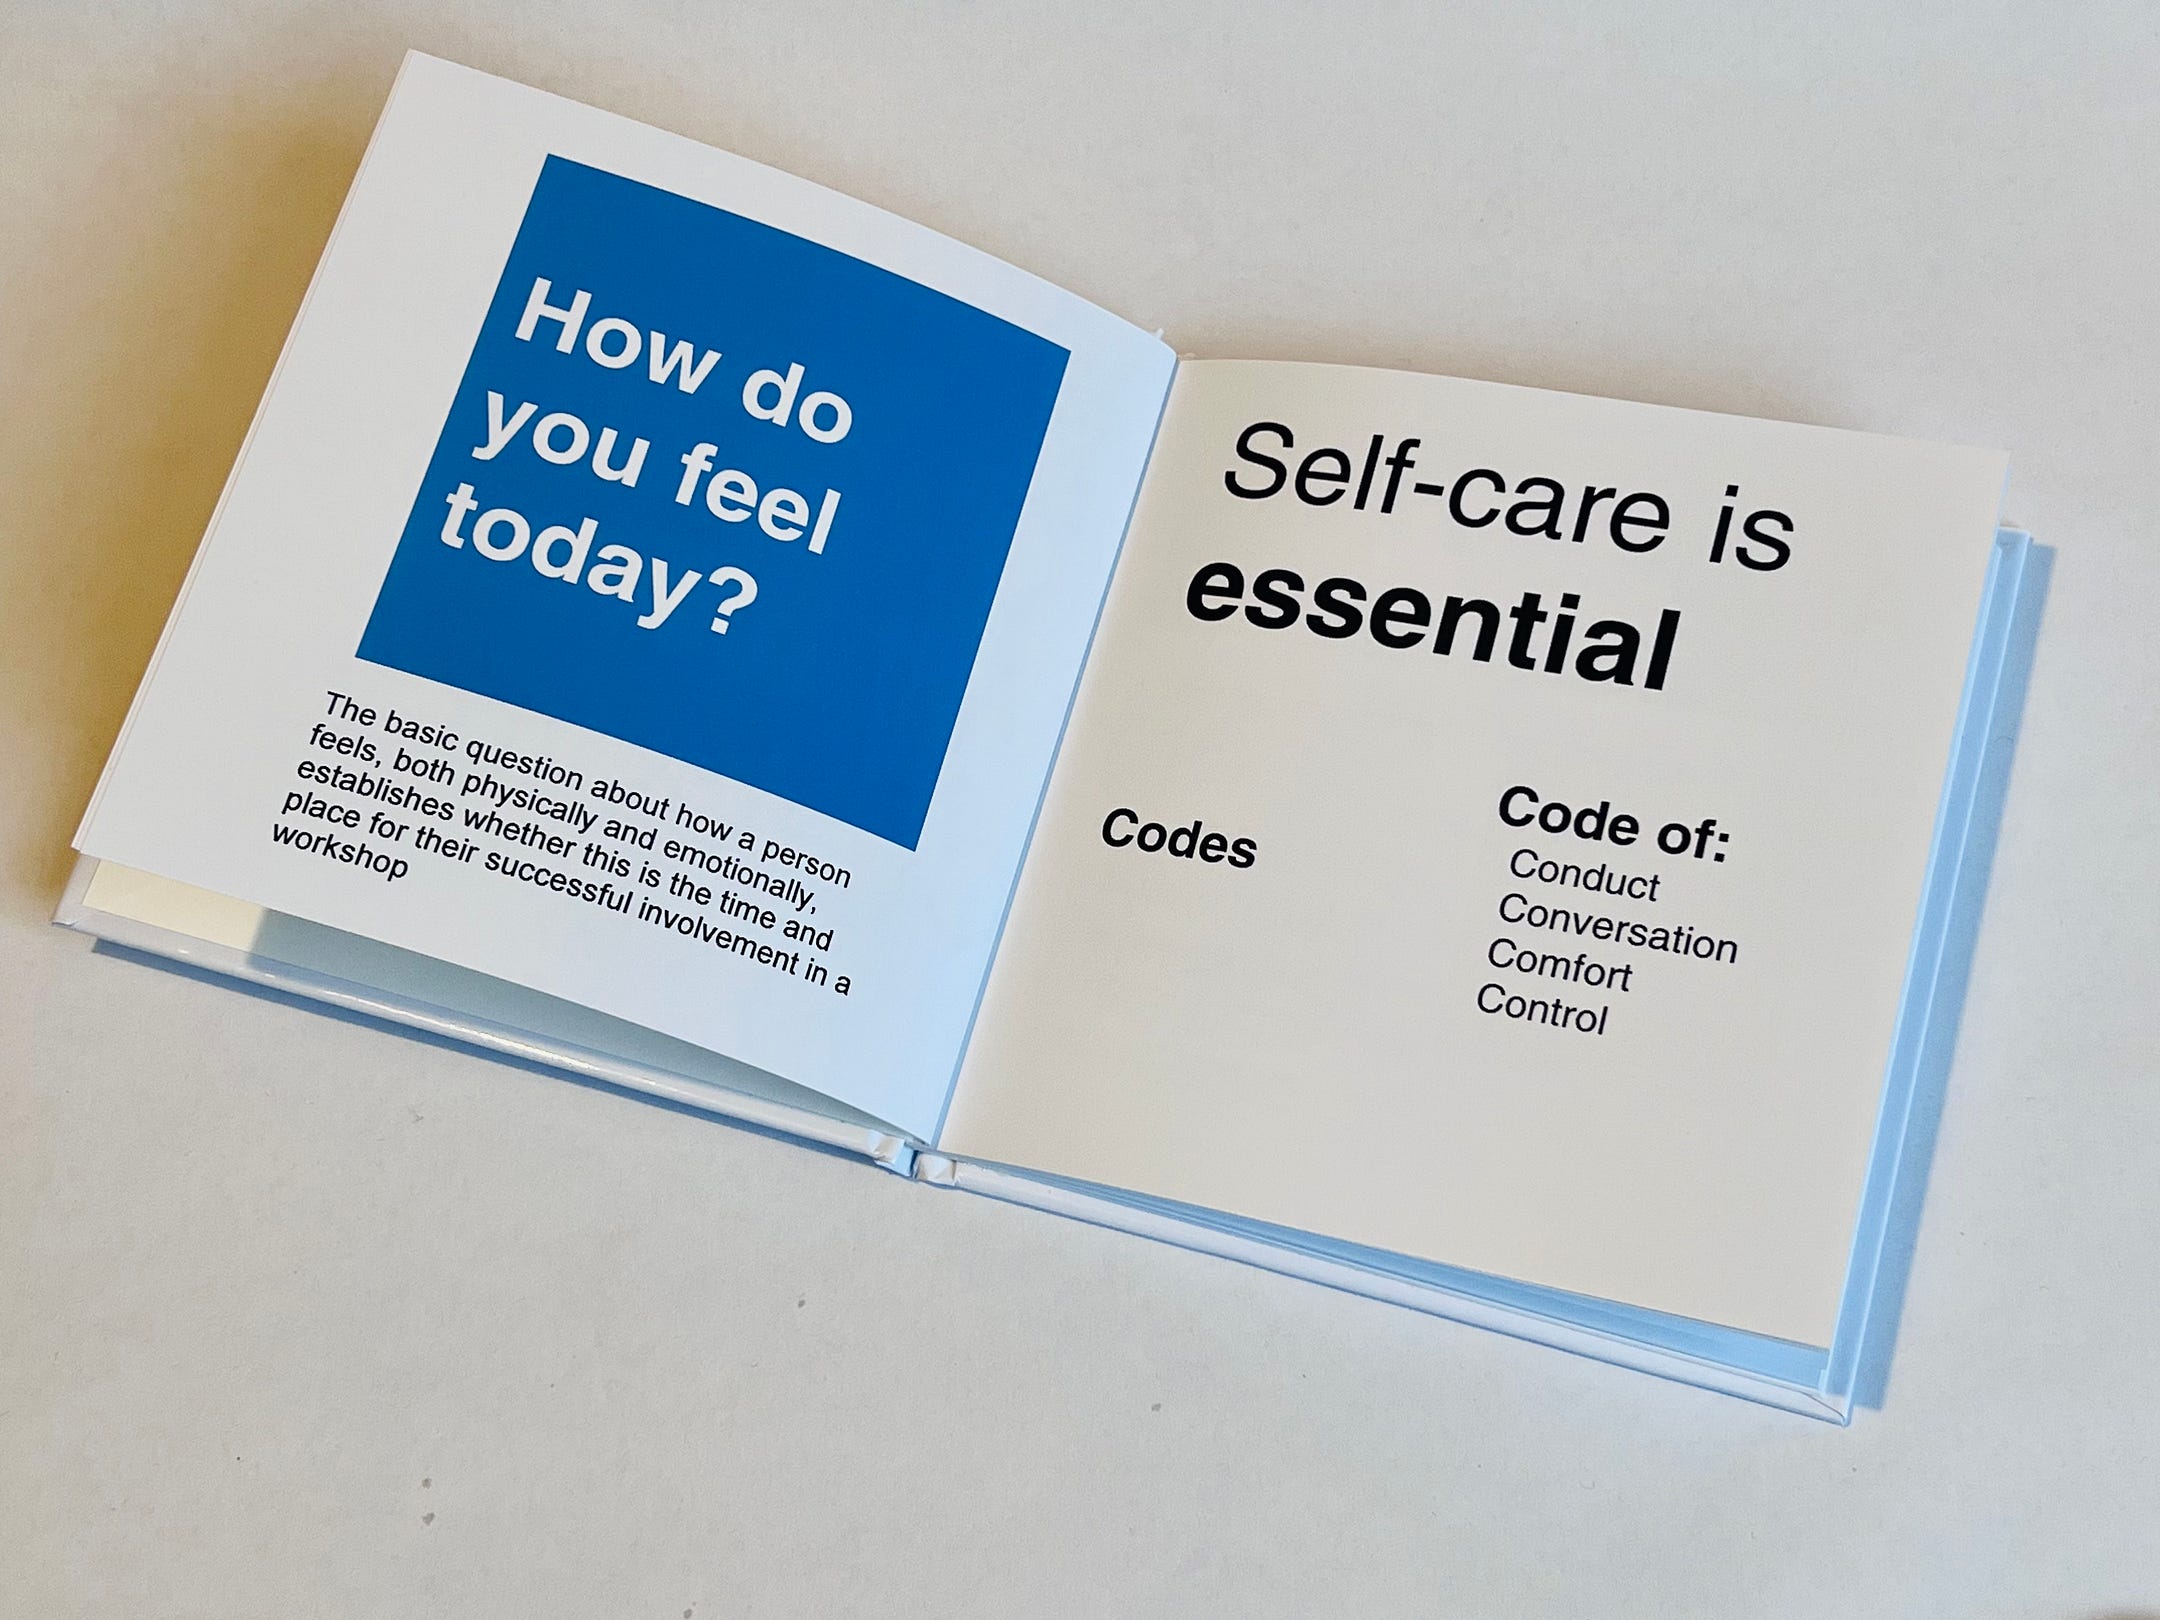 How do you feel today? pages on self care and conduct